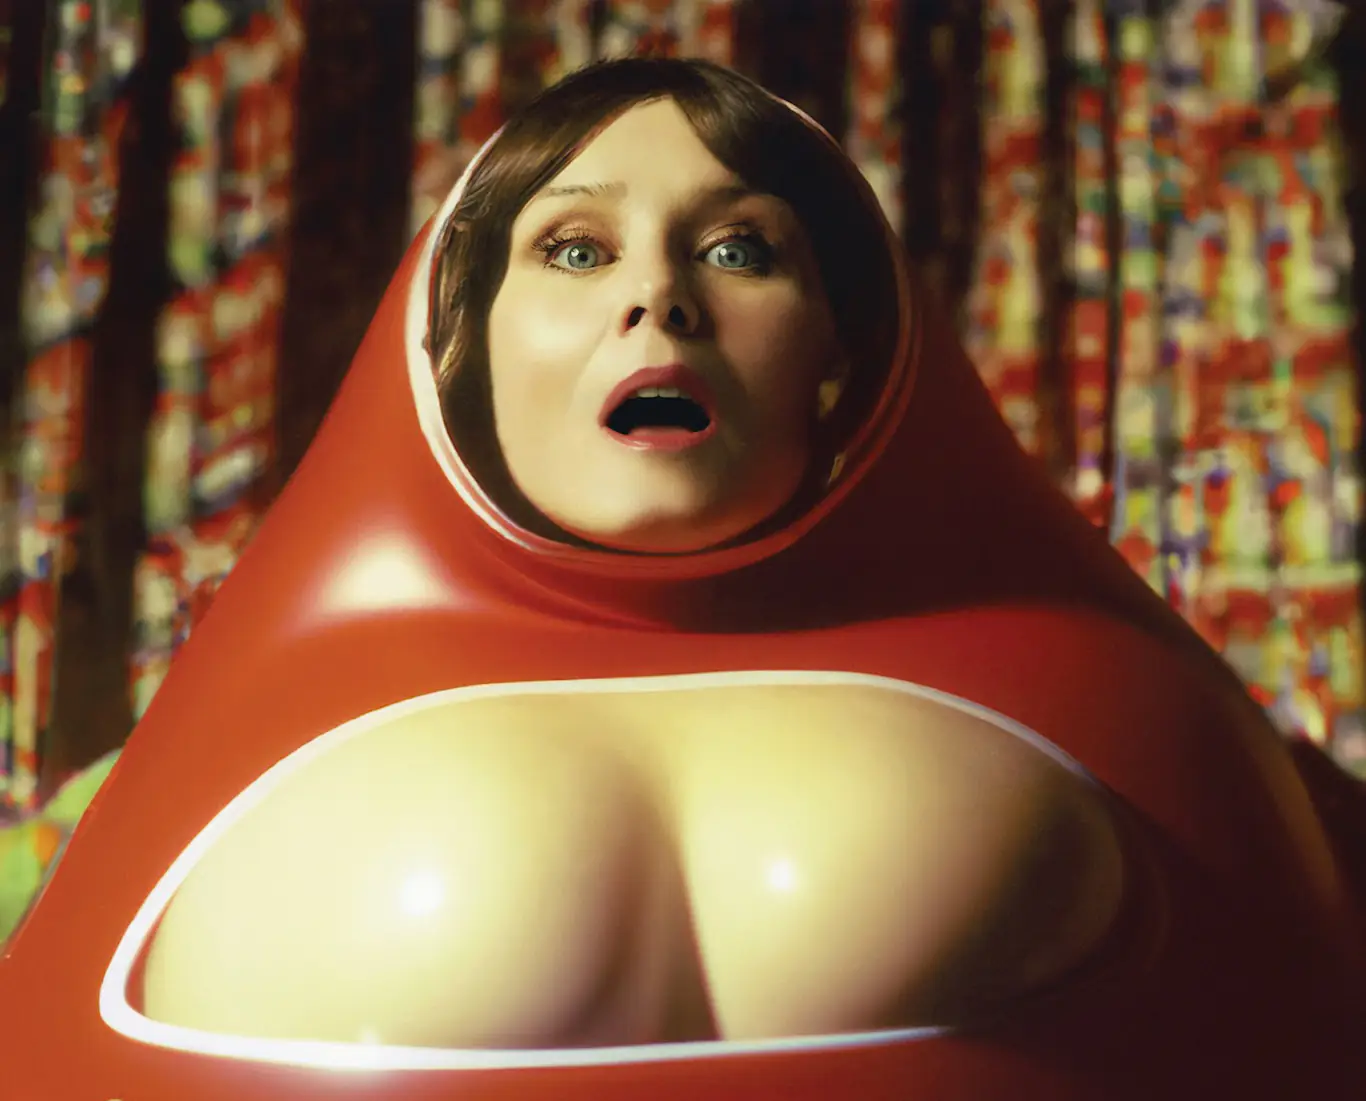 RÓISÍN MURPHY returns with the video for brand new single ‘Fader’